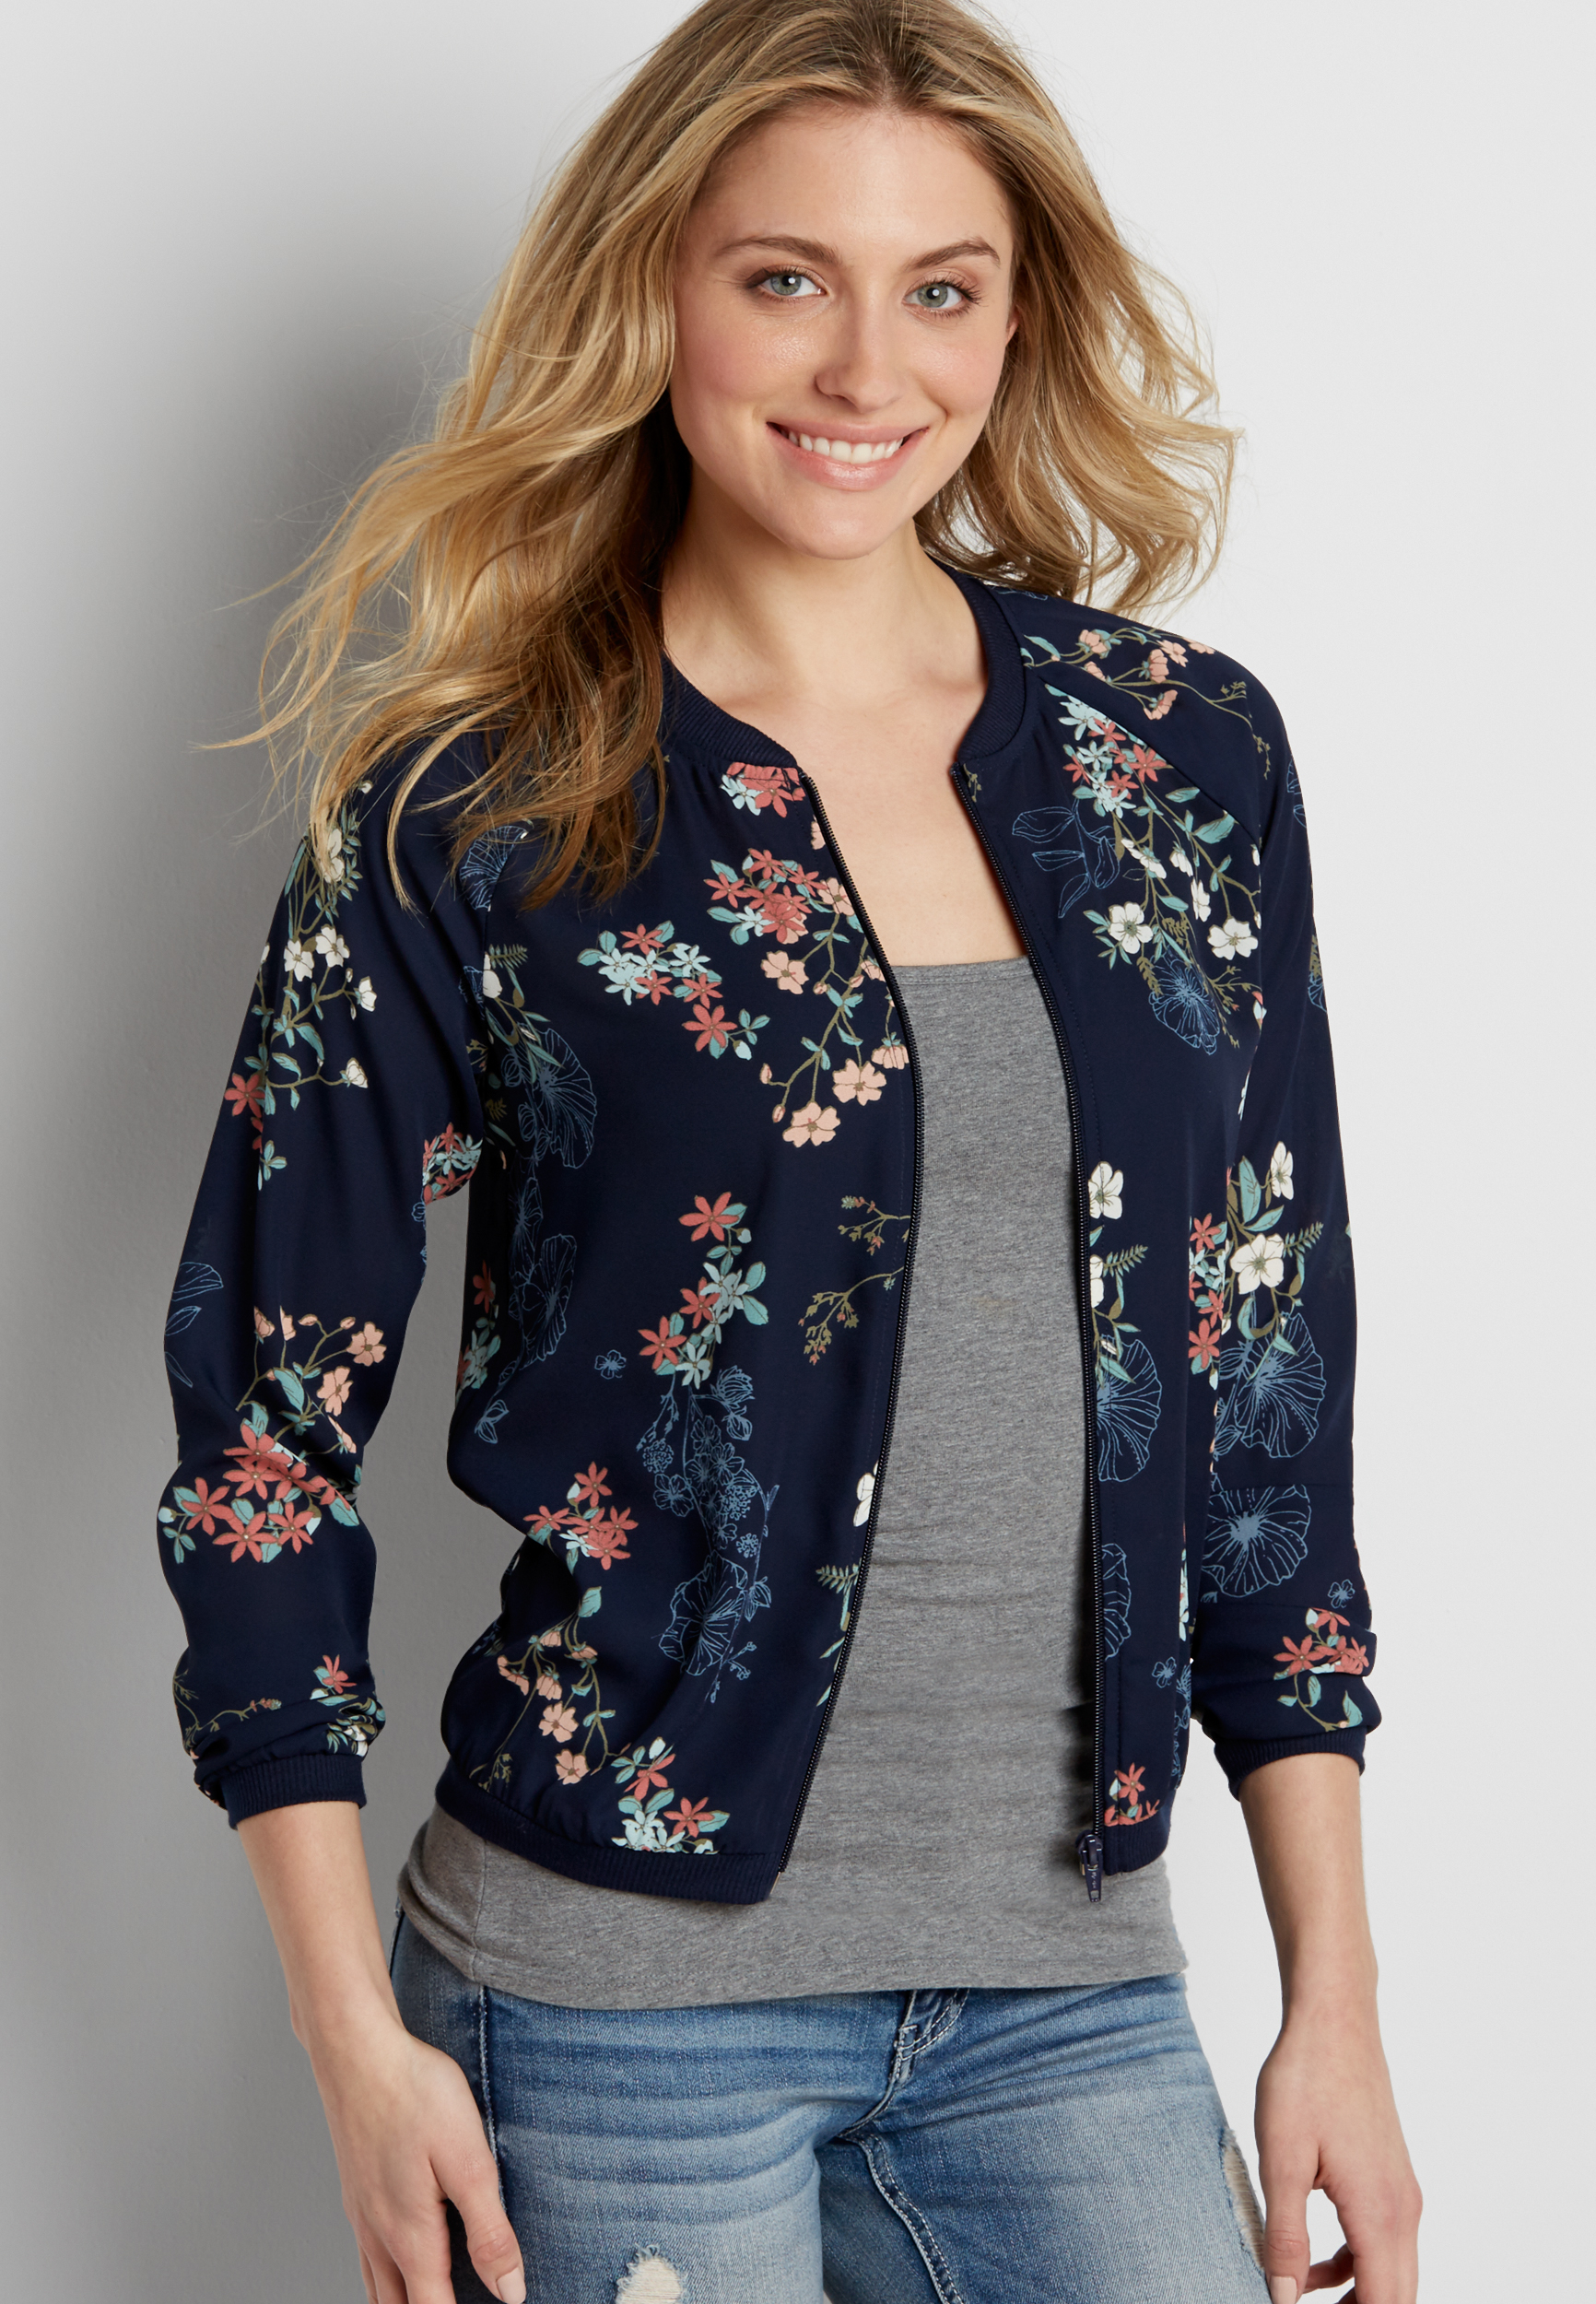 chiffon bomber jacket in navy blue floral print | maurices